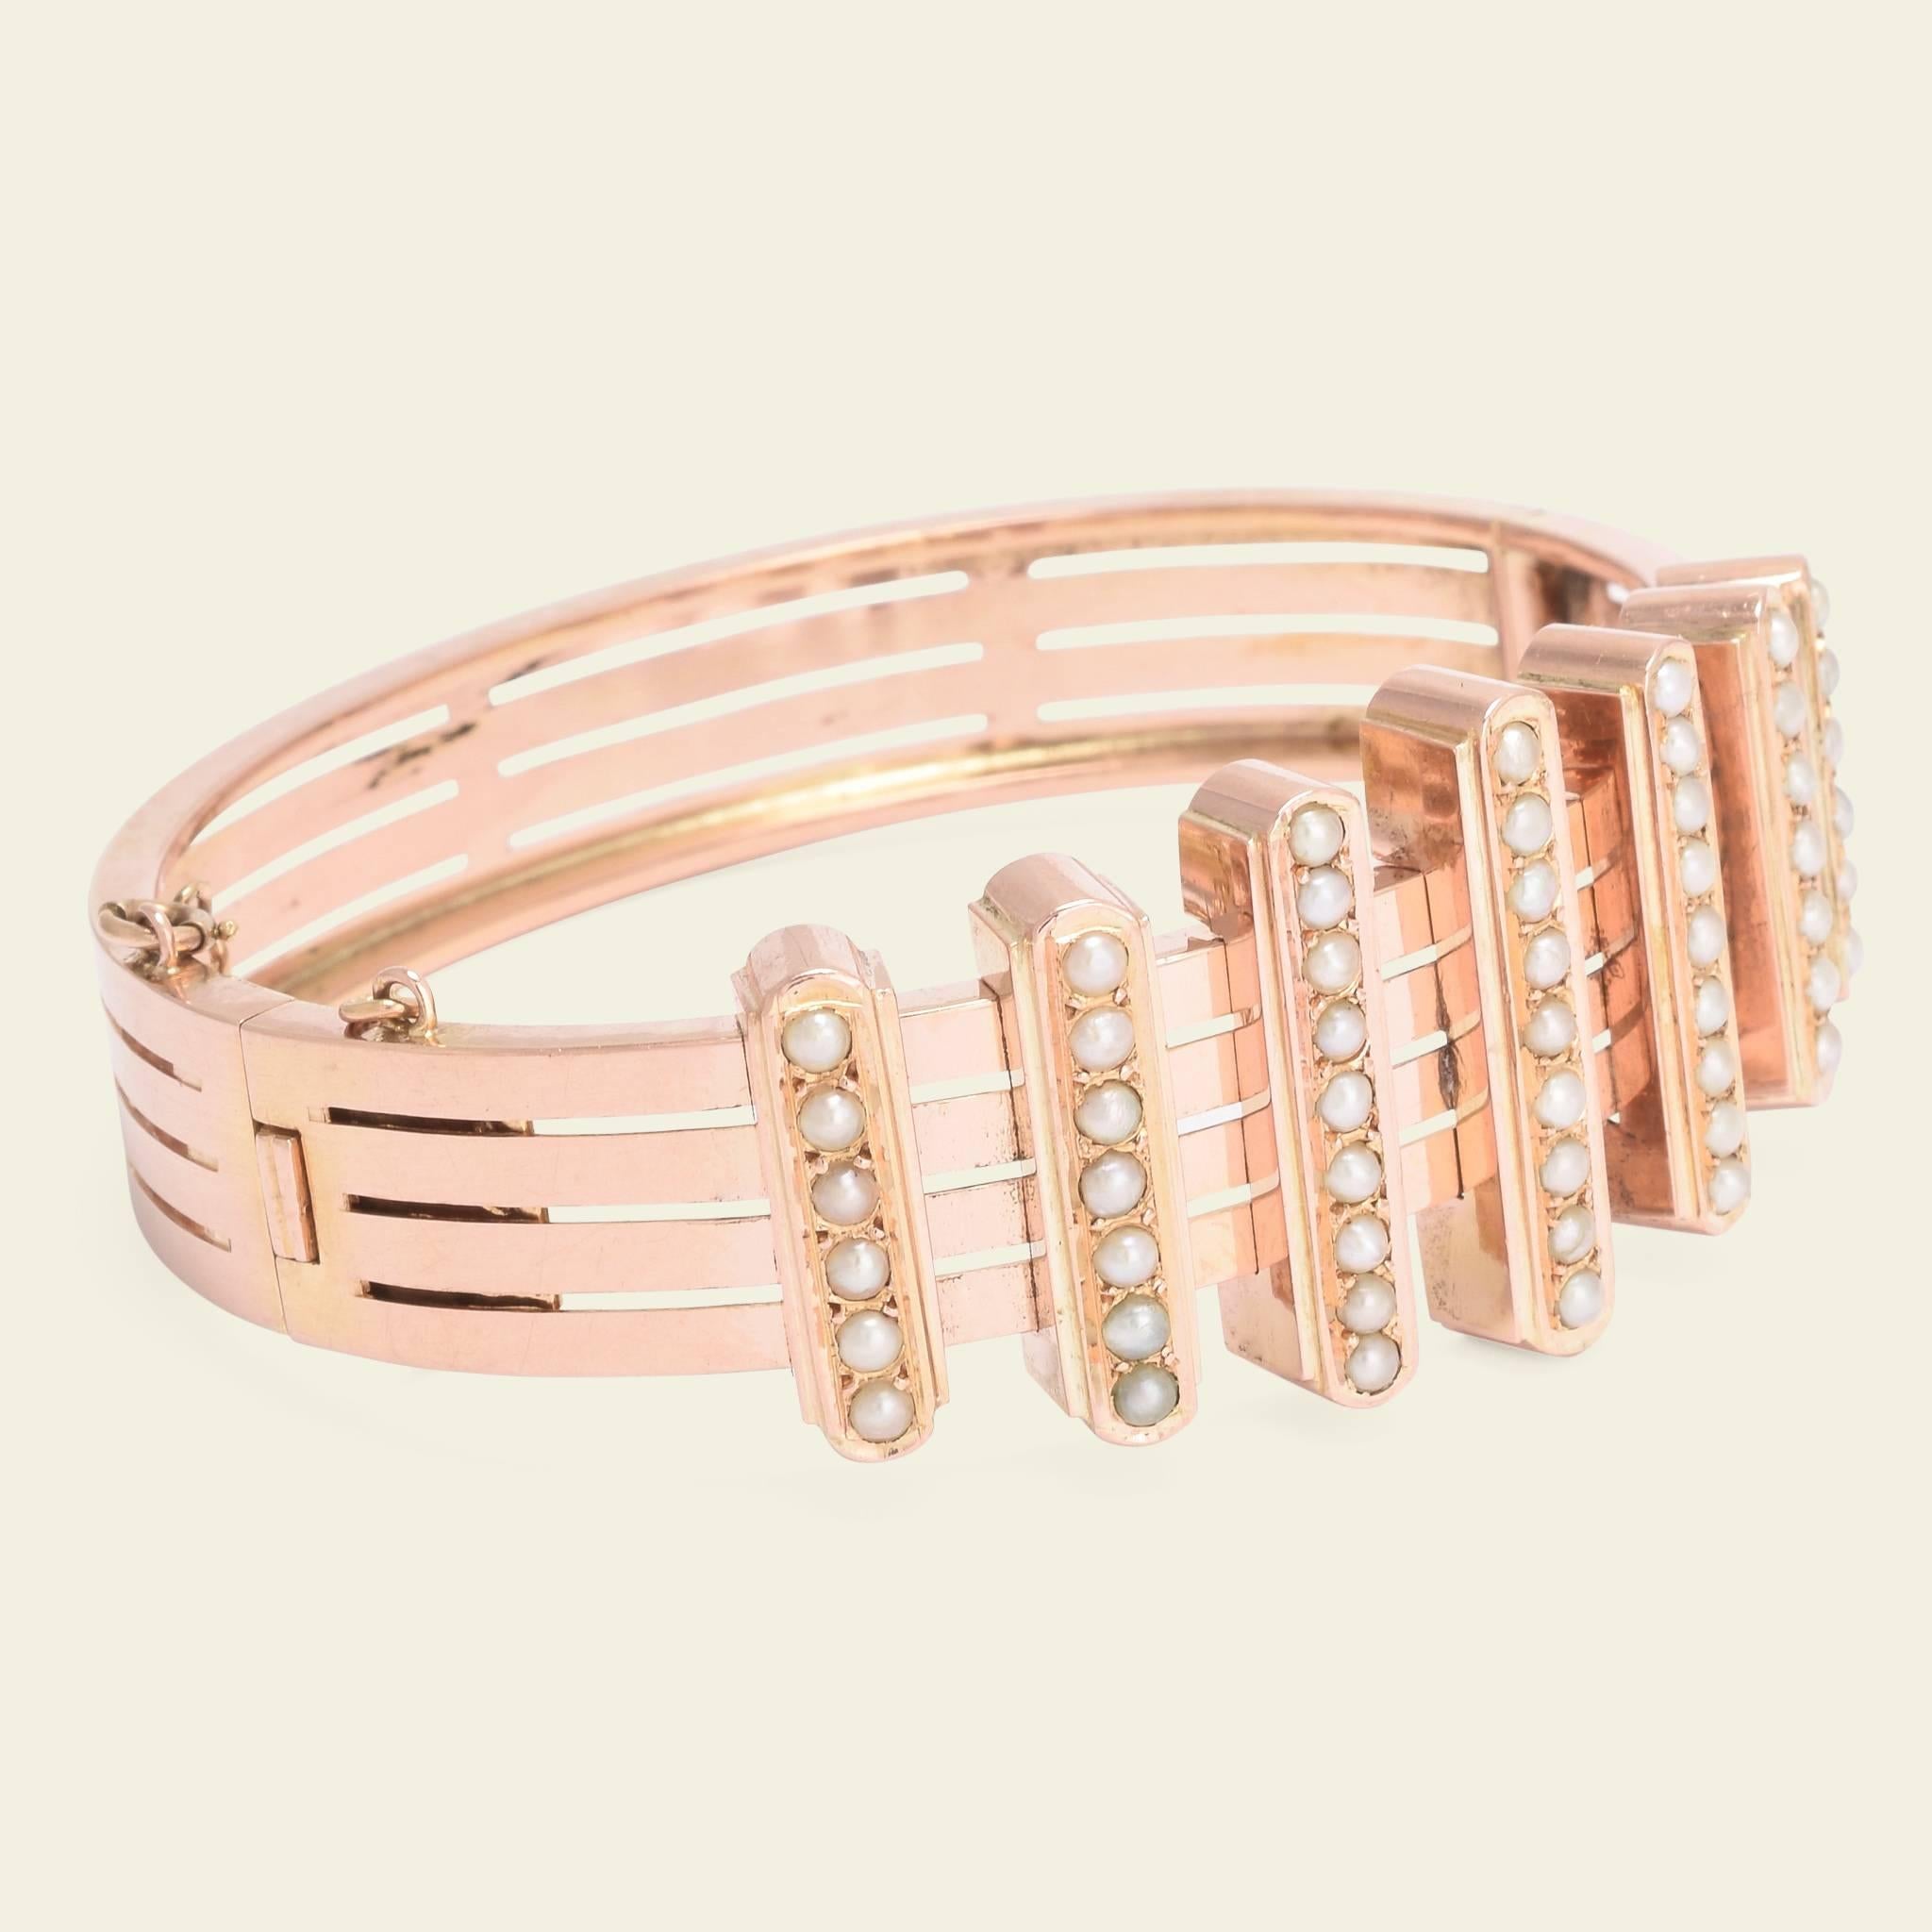 This beautiful Belle Époque bracelet is fashioned in 18k rose and dates to late 19th century France. The shank of the bracelet is composed of four concentric rings punctuated with perpendicular bars along the back of the bracelet, and seven